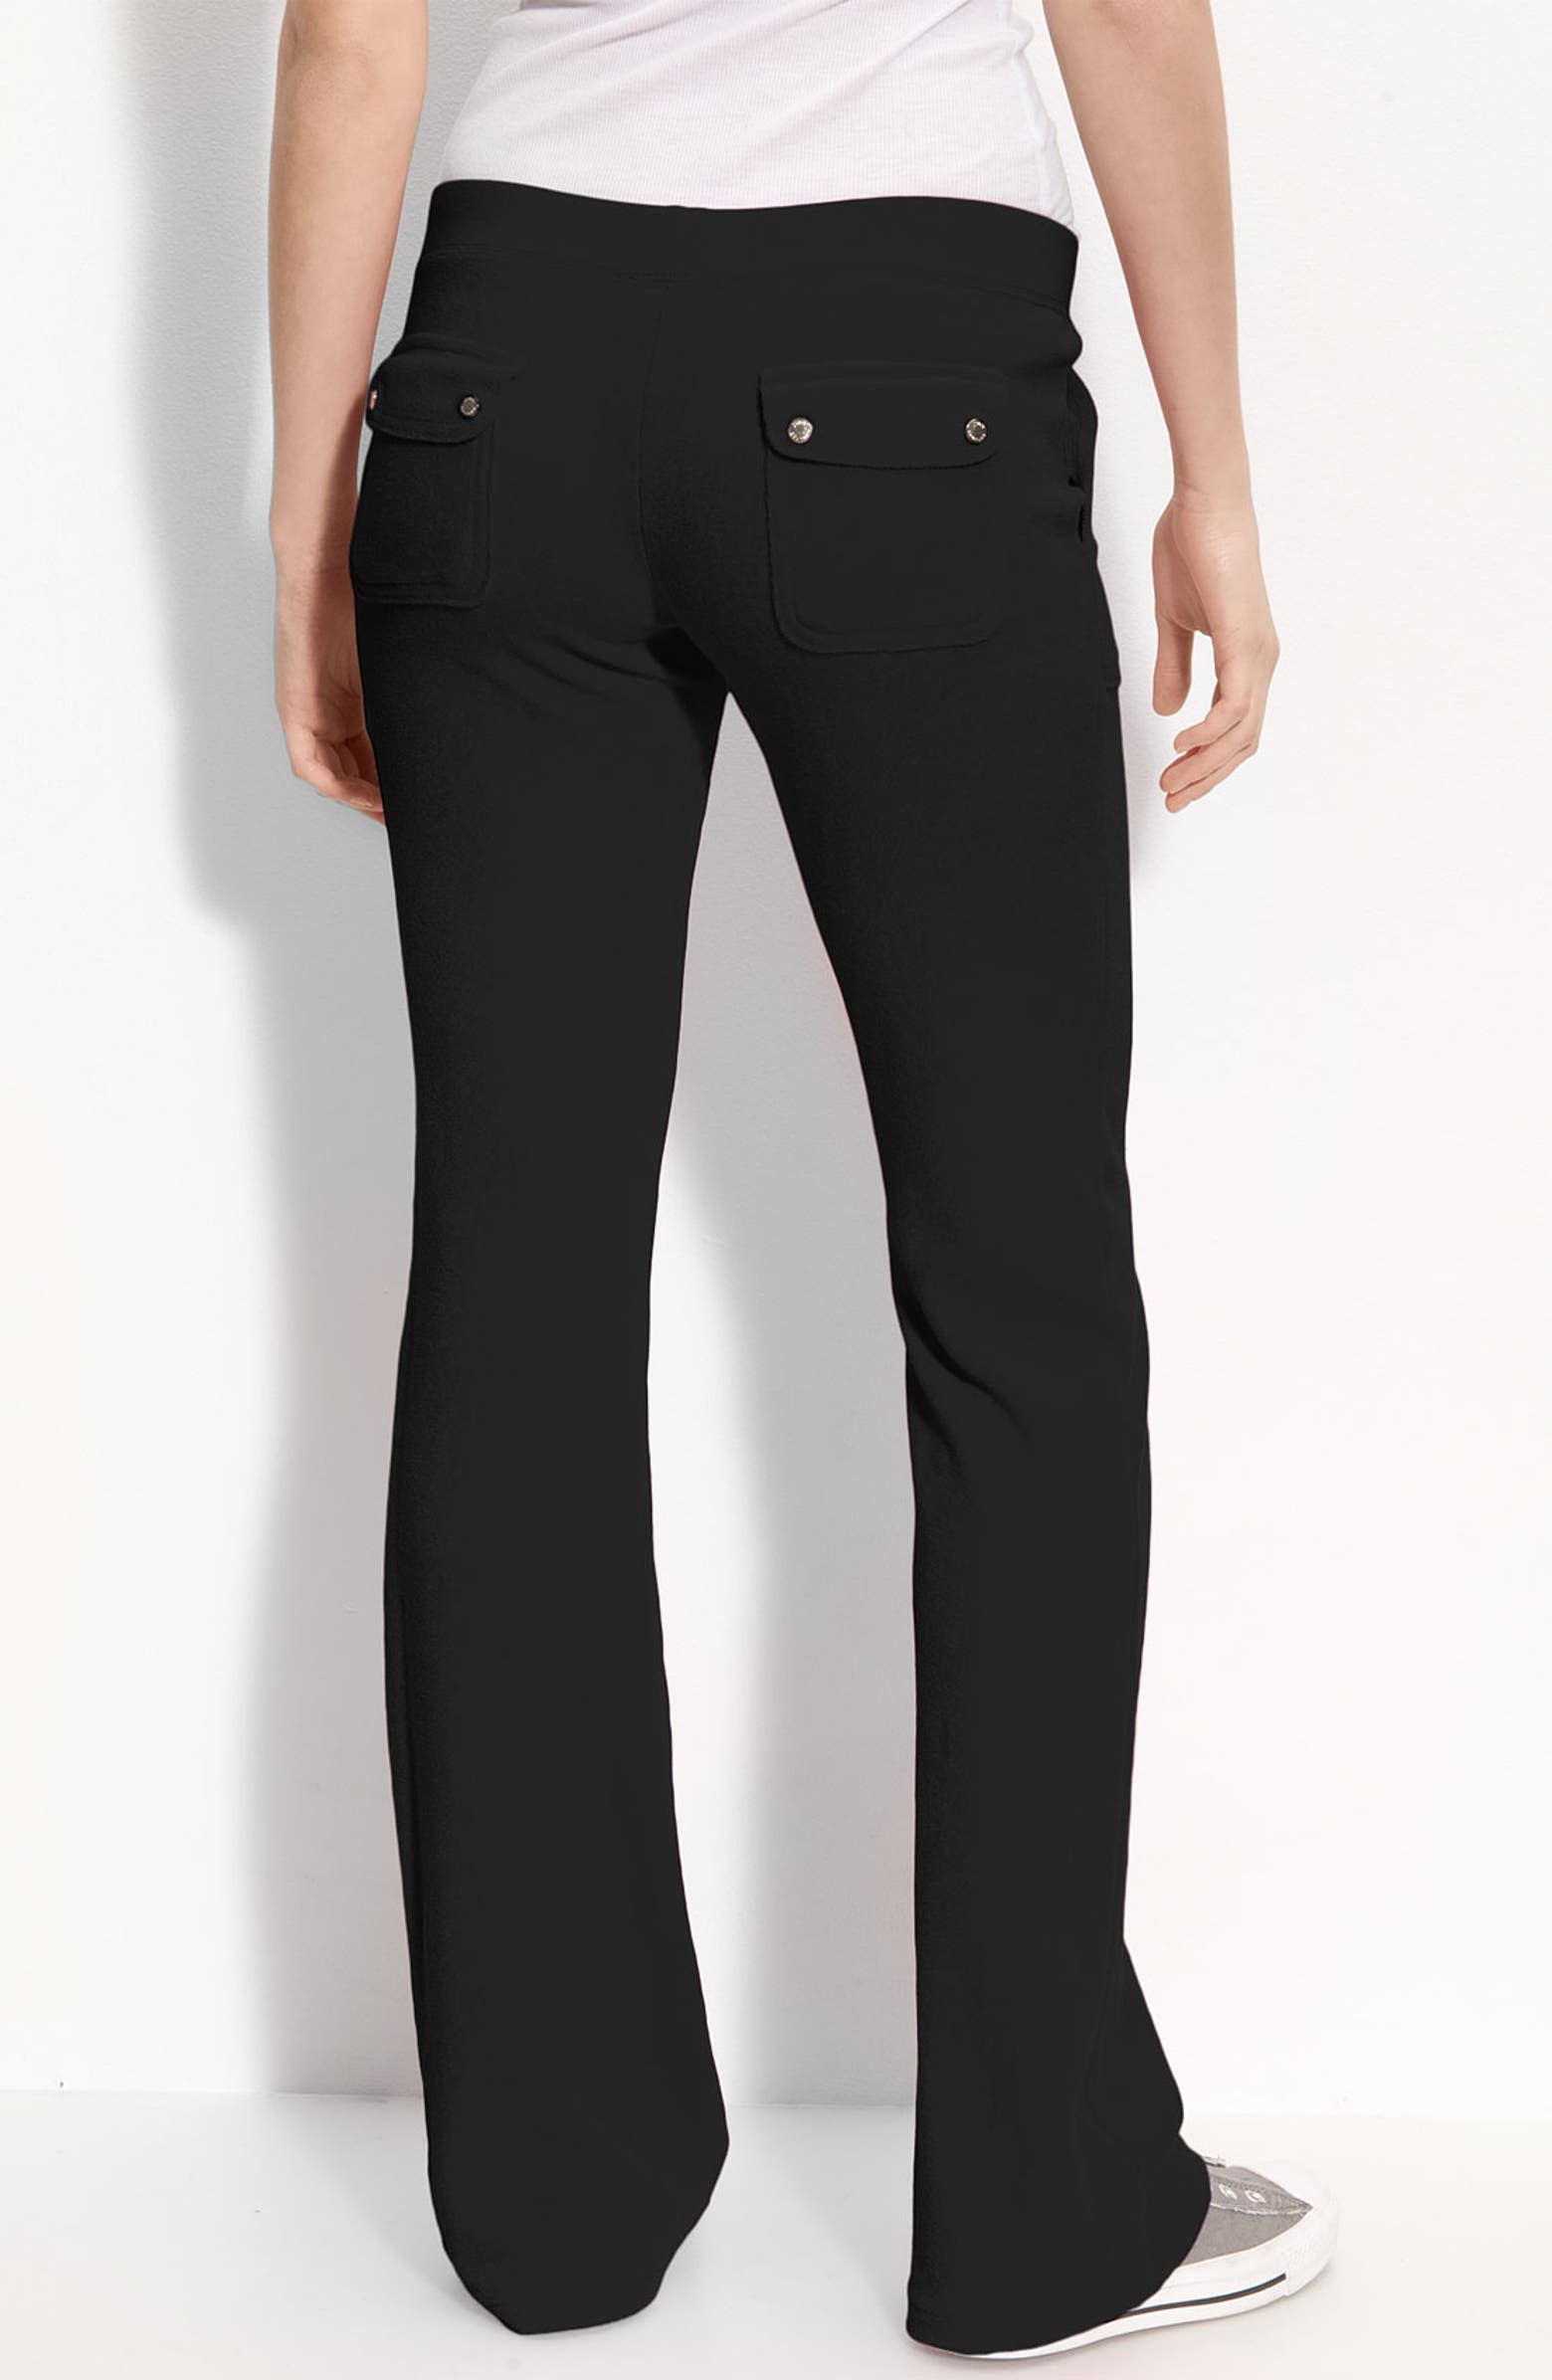 Juicy Couture French Terry Pocket Pants | Nordstrom